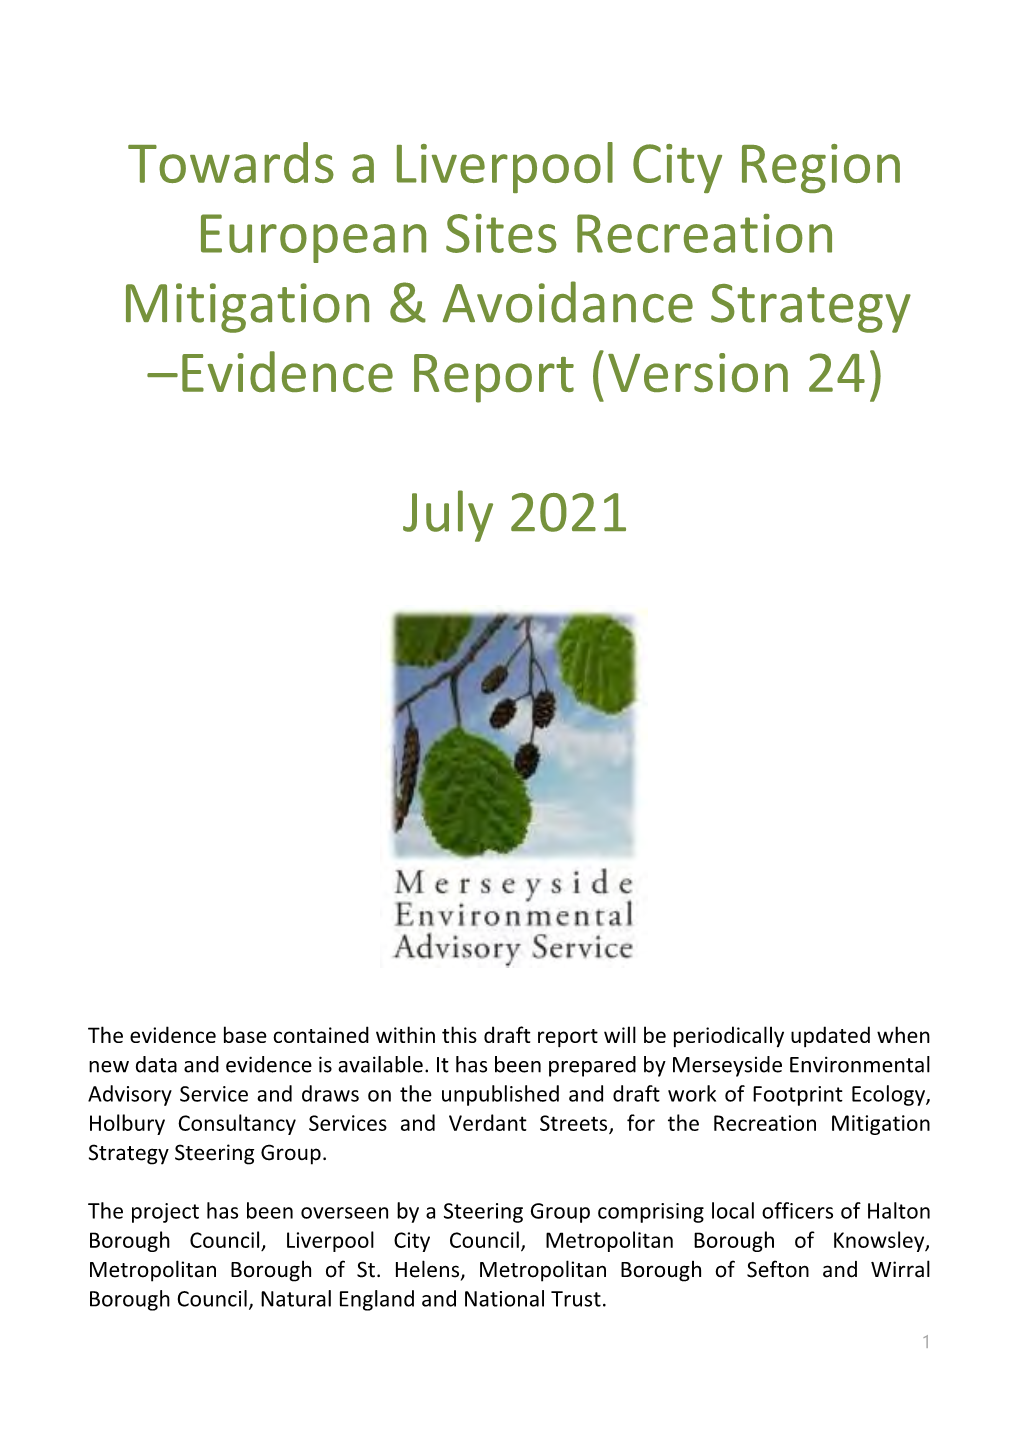 Evidence Report (Version 24)